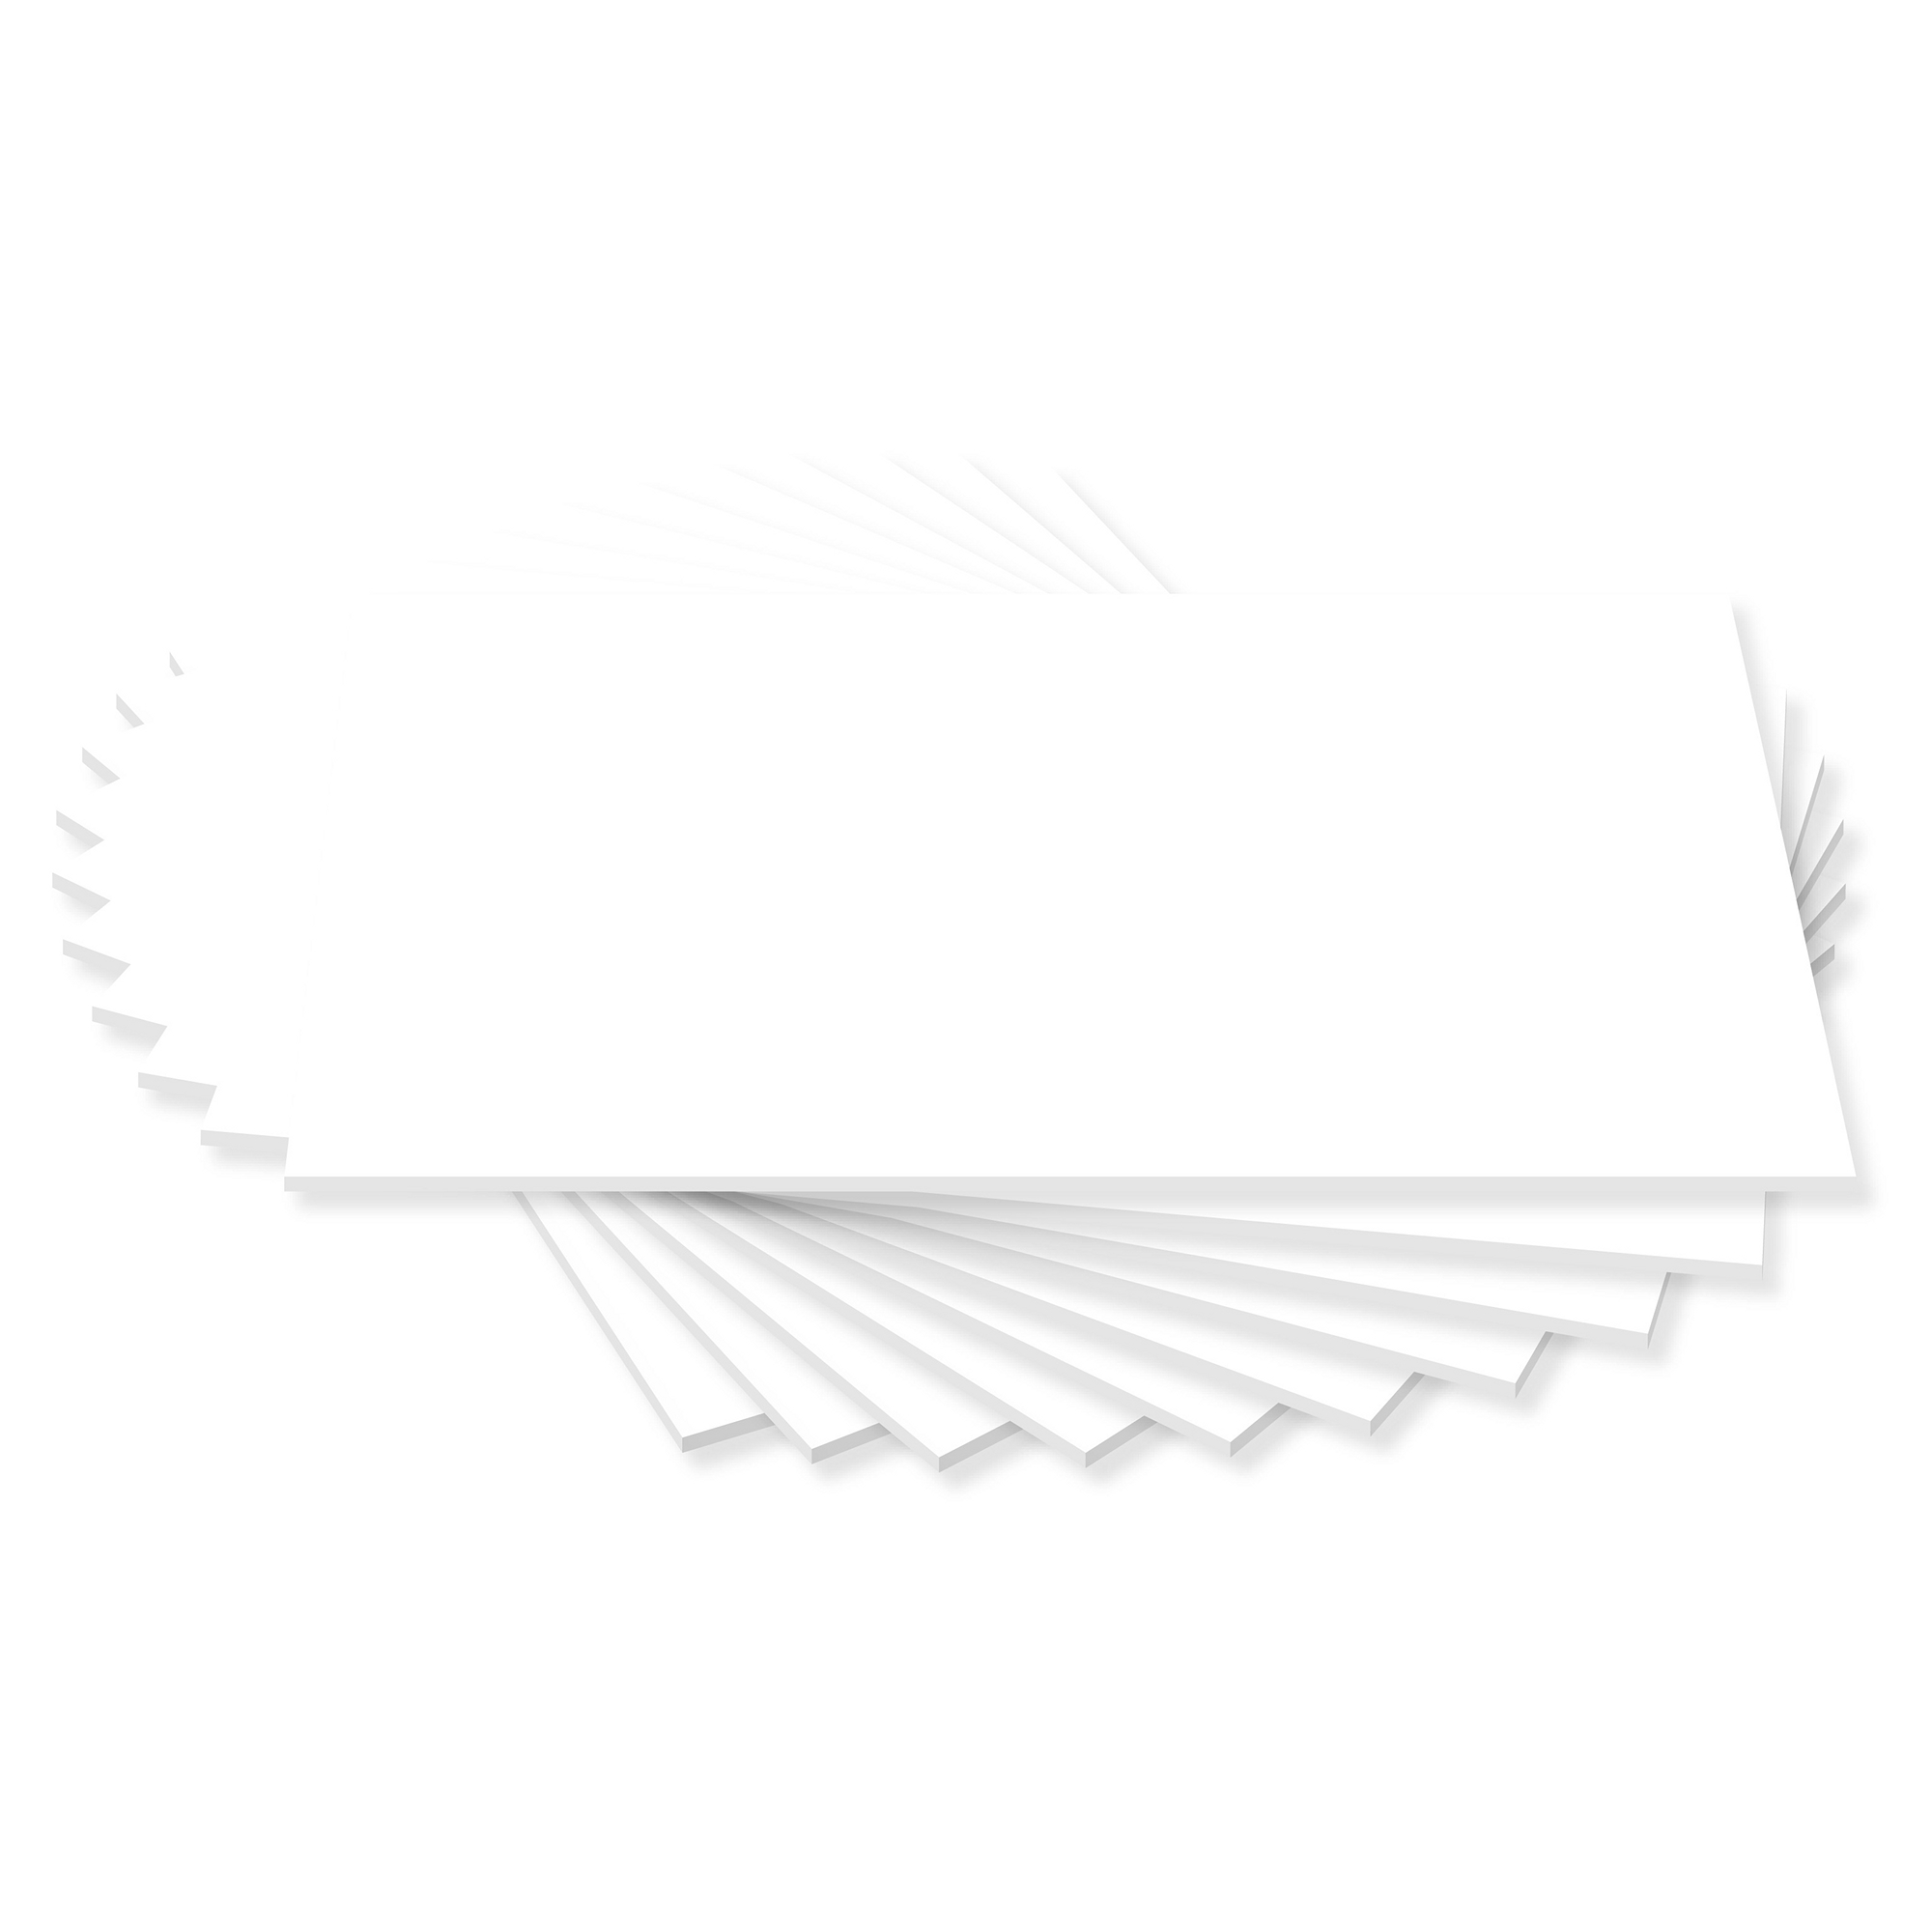 White Card 280 Micron Sra2 Pack Of 50